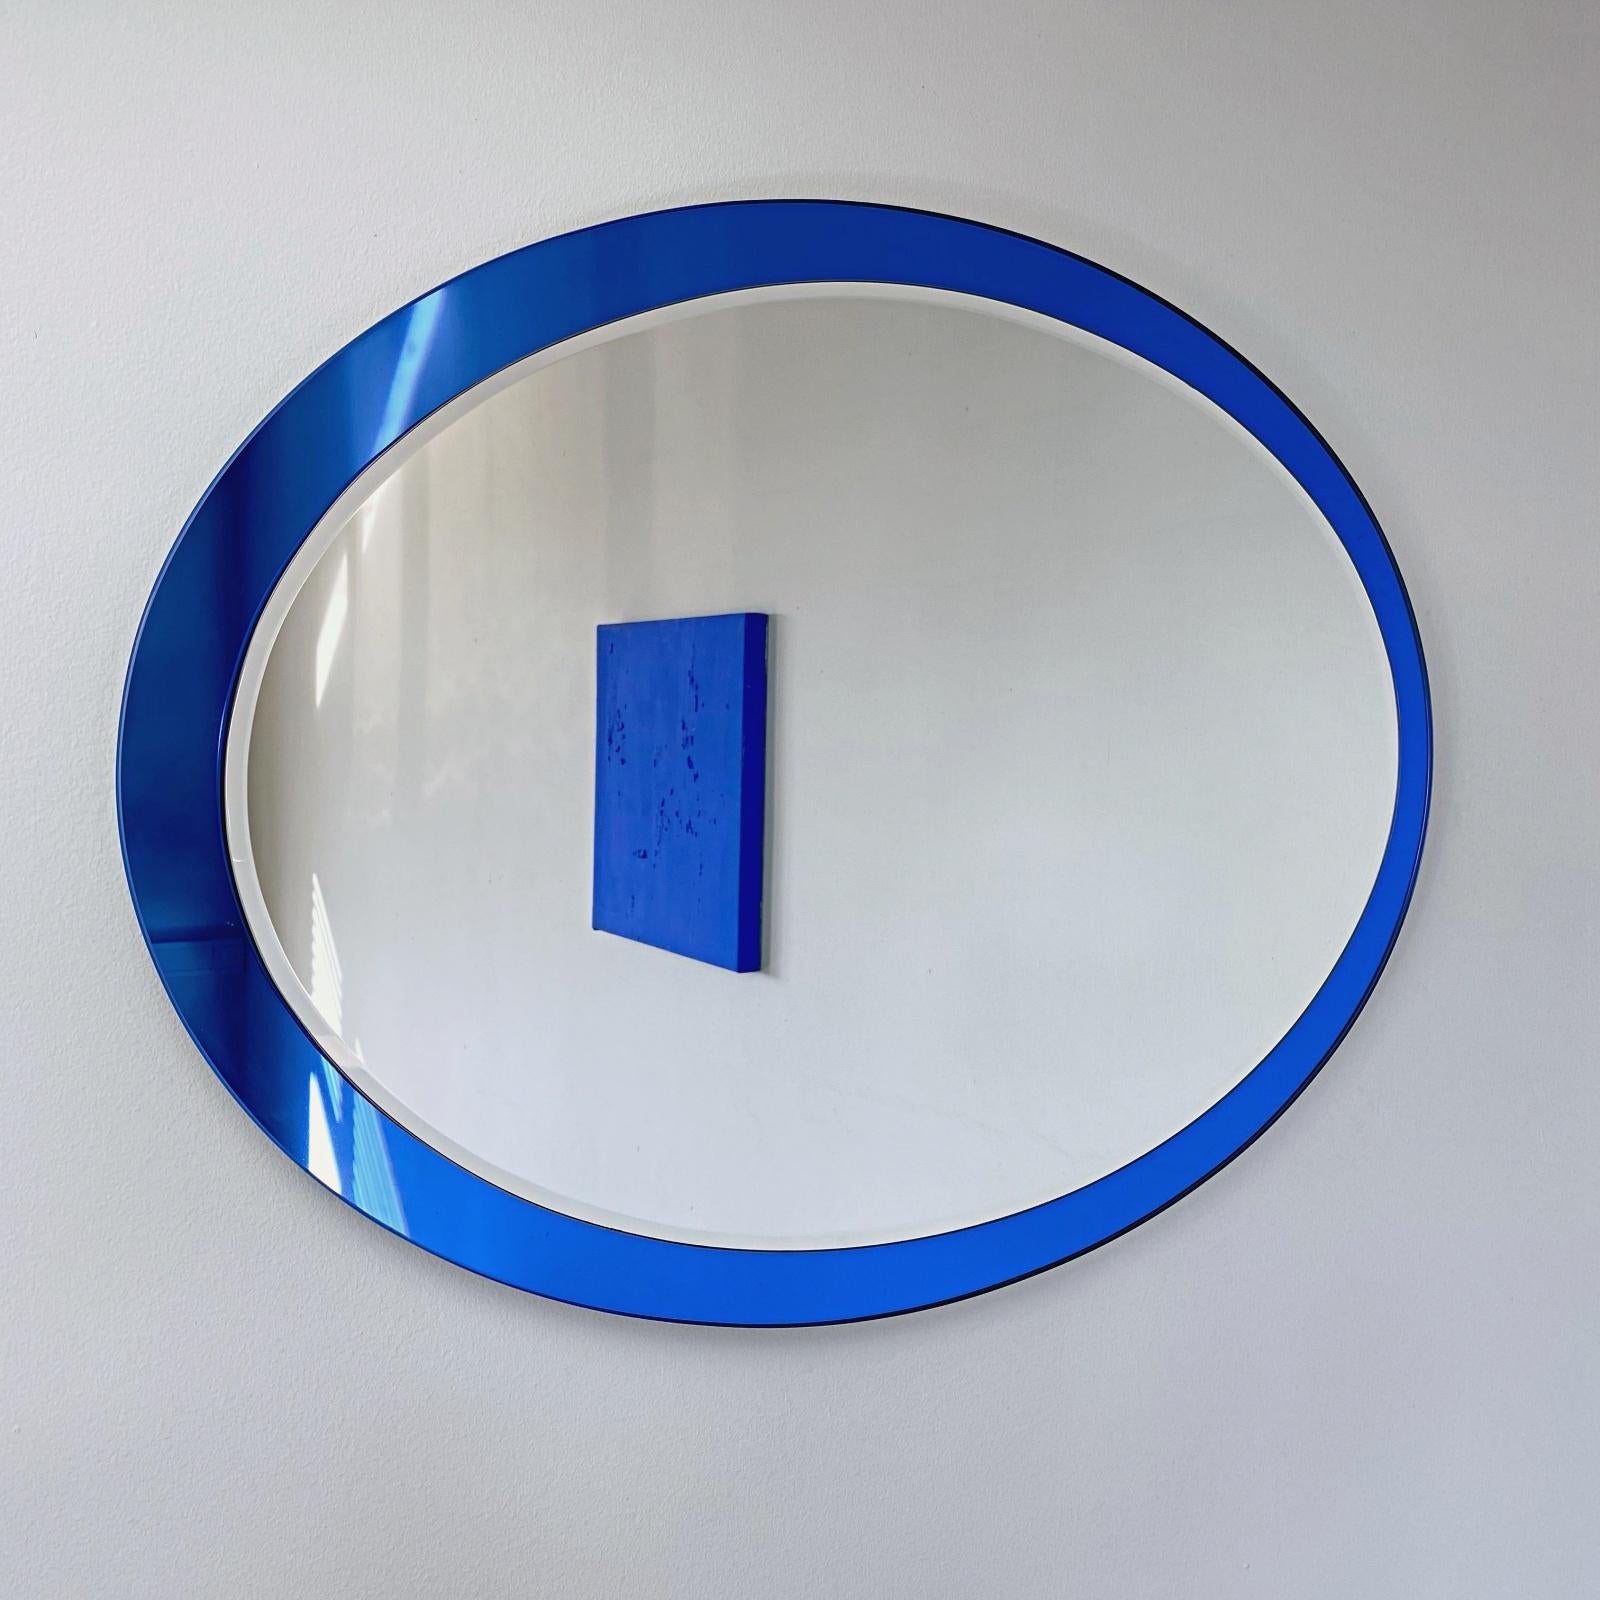 Faceted Large Midcentury Fontana Arte Labeled Blue Edged Oval Wall Mirror, 1960s, Italy